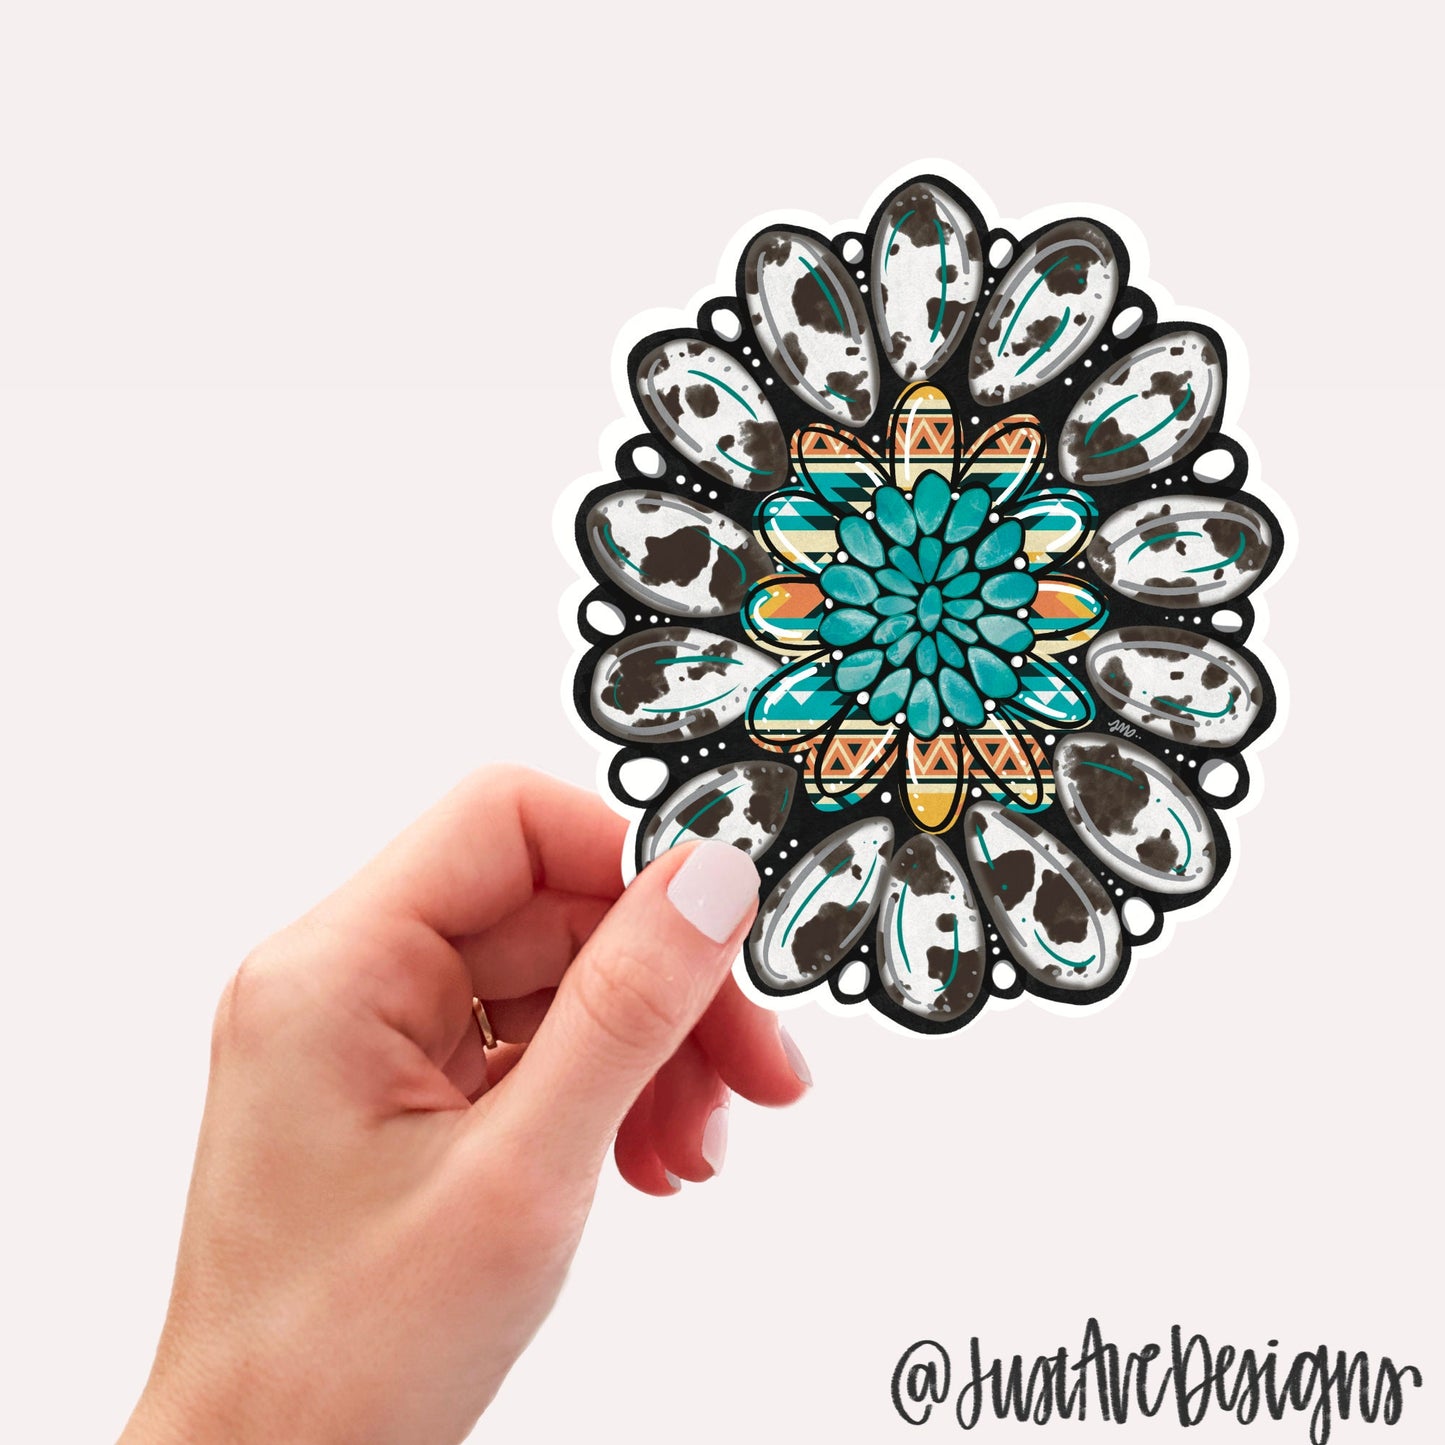 Turquoise and Cow Print Squash Blossom Sticker